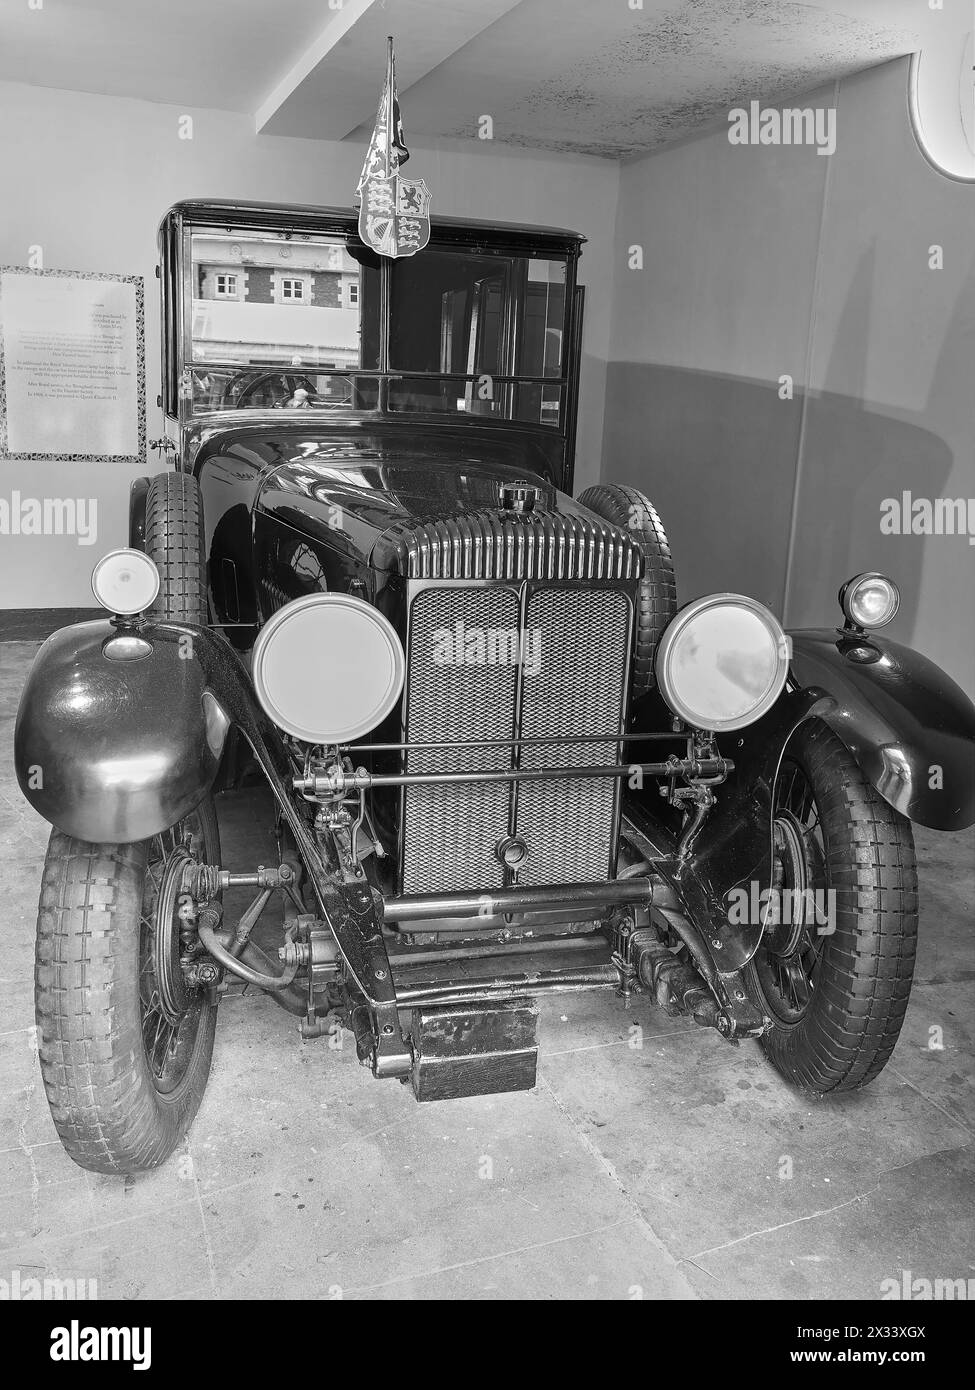 Daimler Double Six-Brougham car, bought by king George V in 1929,  in a garage at the country residence of the british monarch, Sandringham House,  En Stock Photo